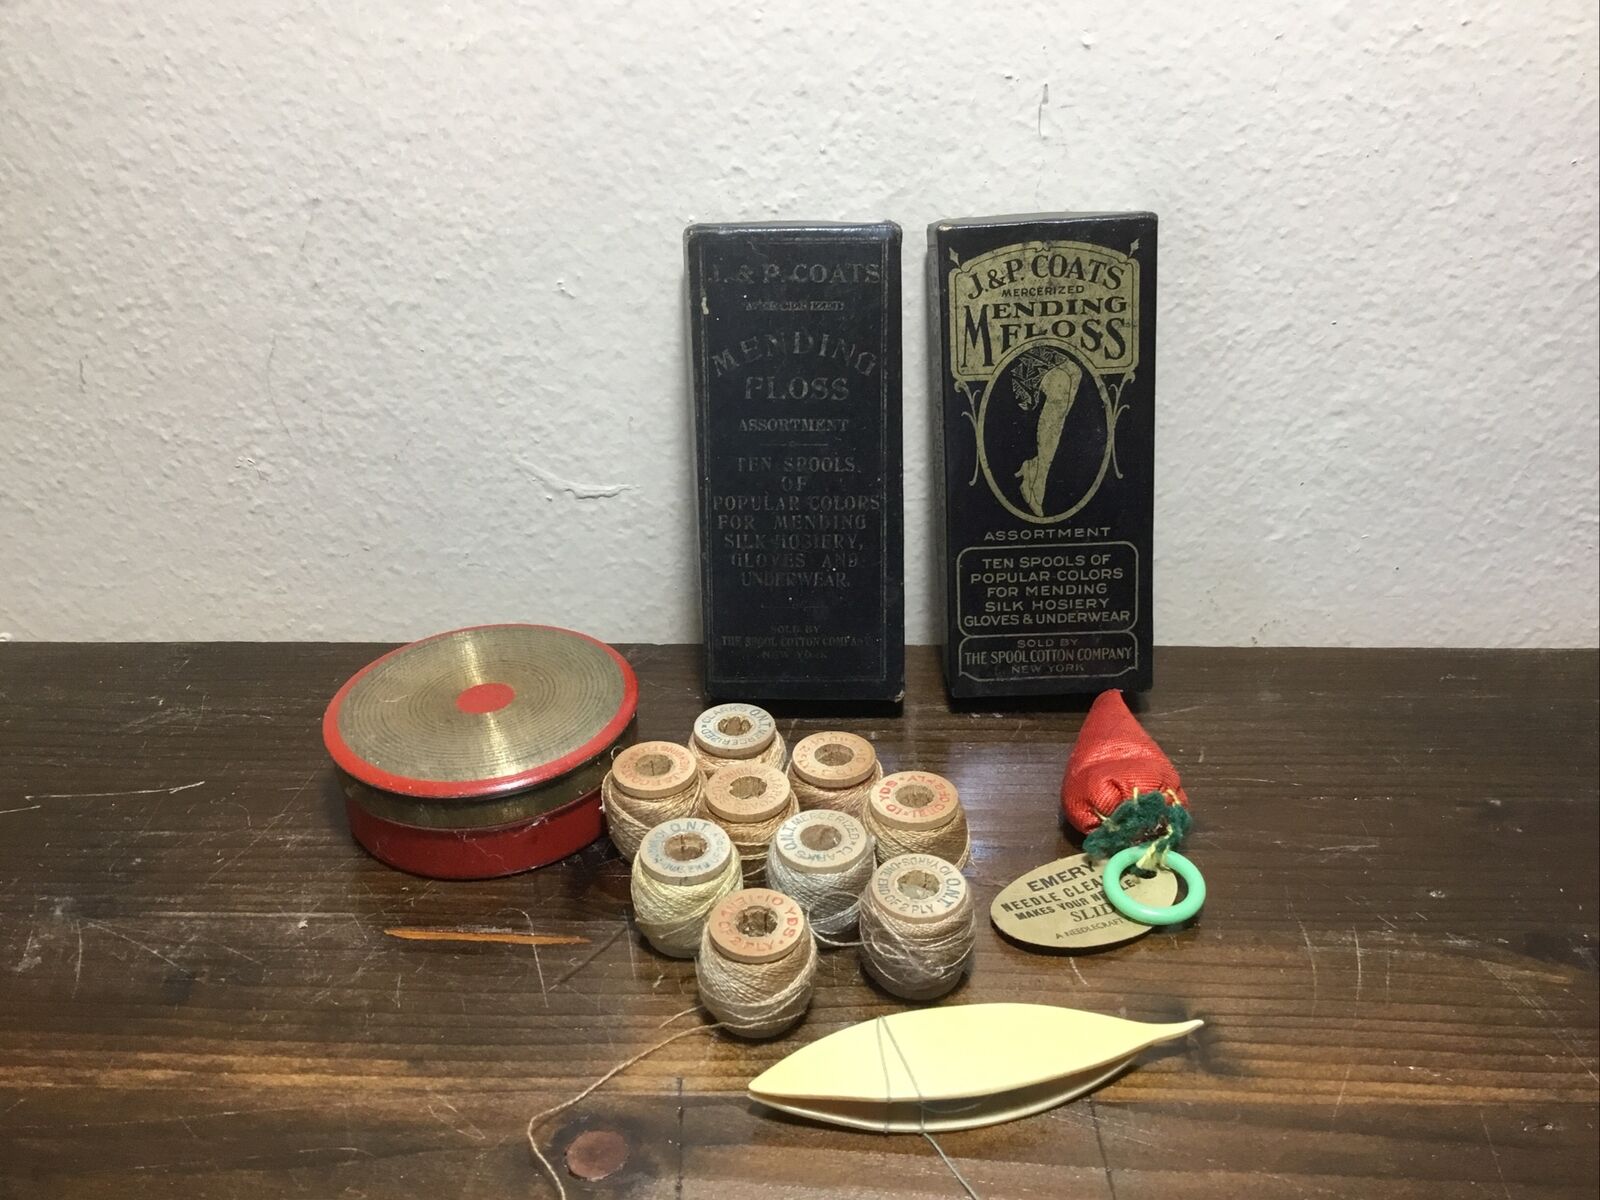 Vintage J & P Coats Mercerized Mending Floss Spools And Sewing Notions